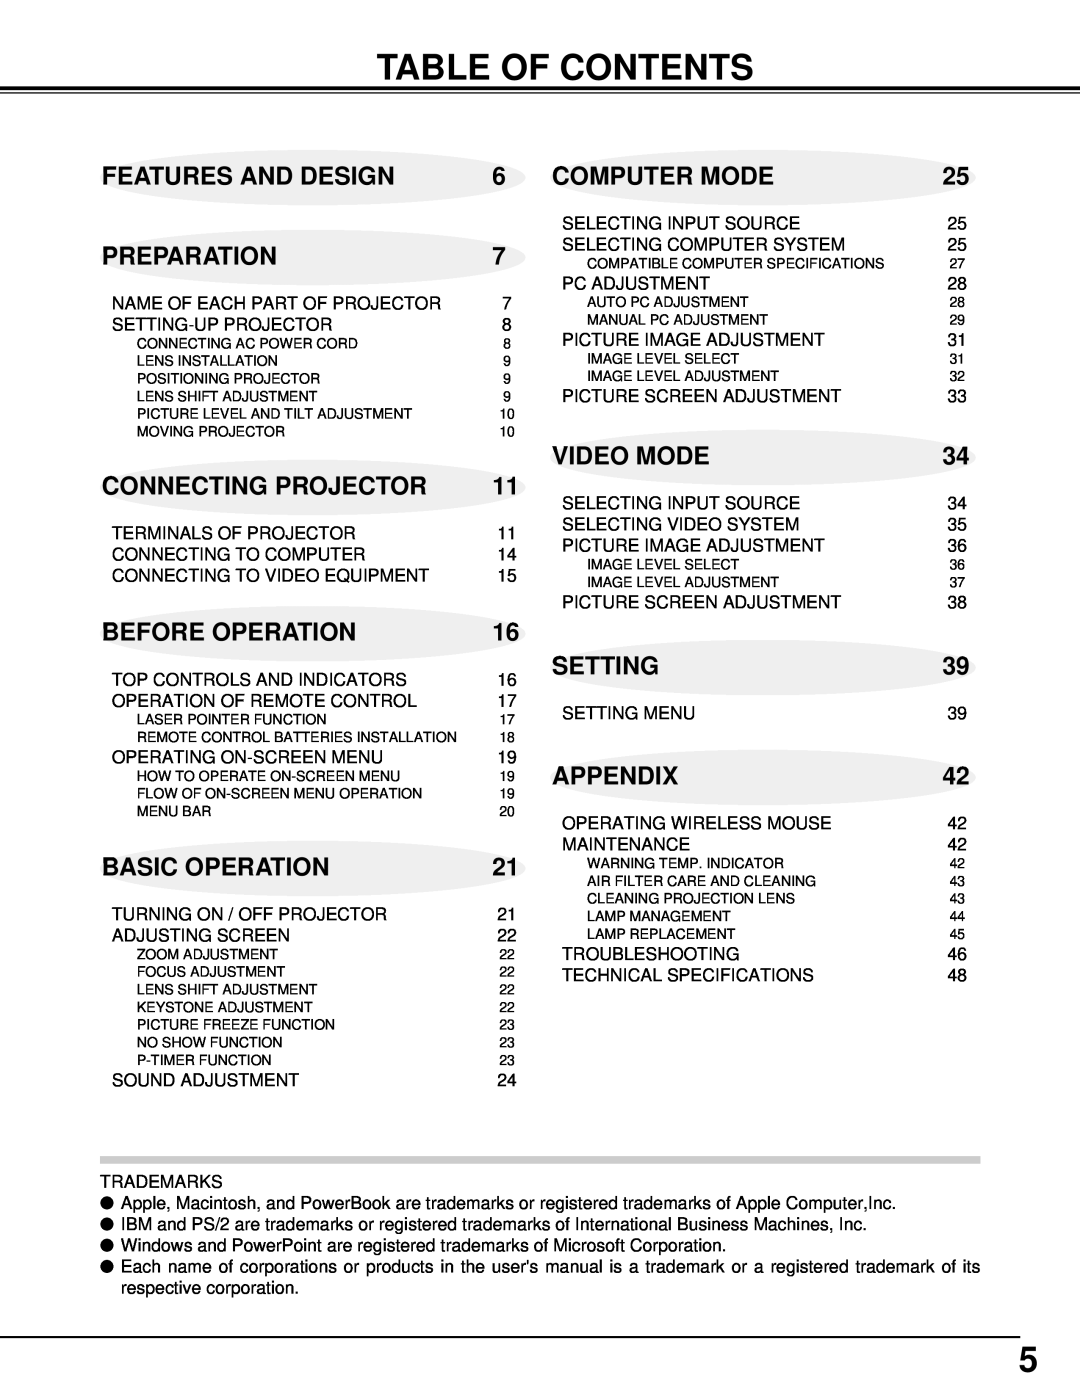 Christie Digital Systems 38-VIV301-01 Table Of Contents, Features And Design, Computer Mode, Preparation, Video Mode 